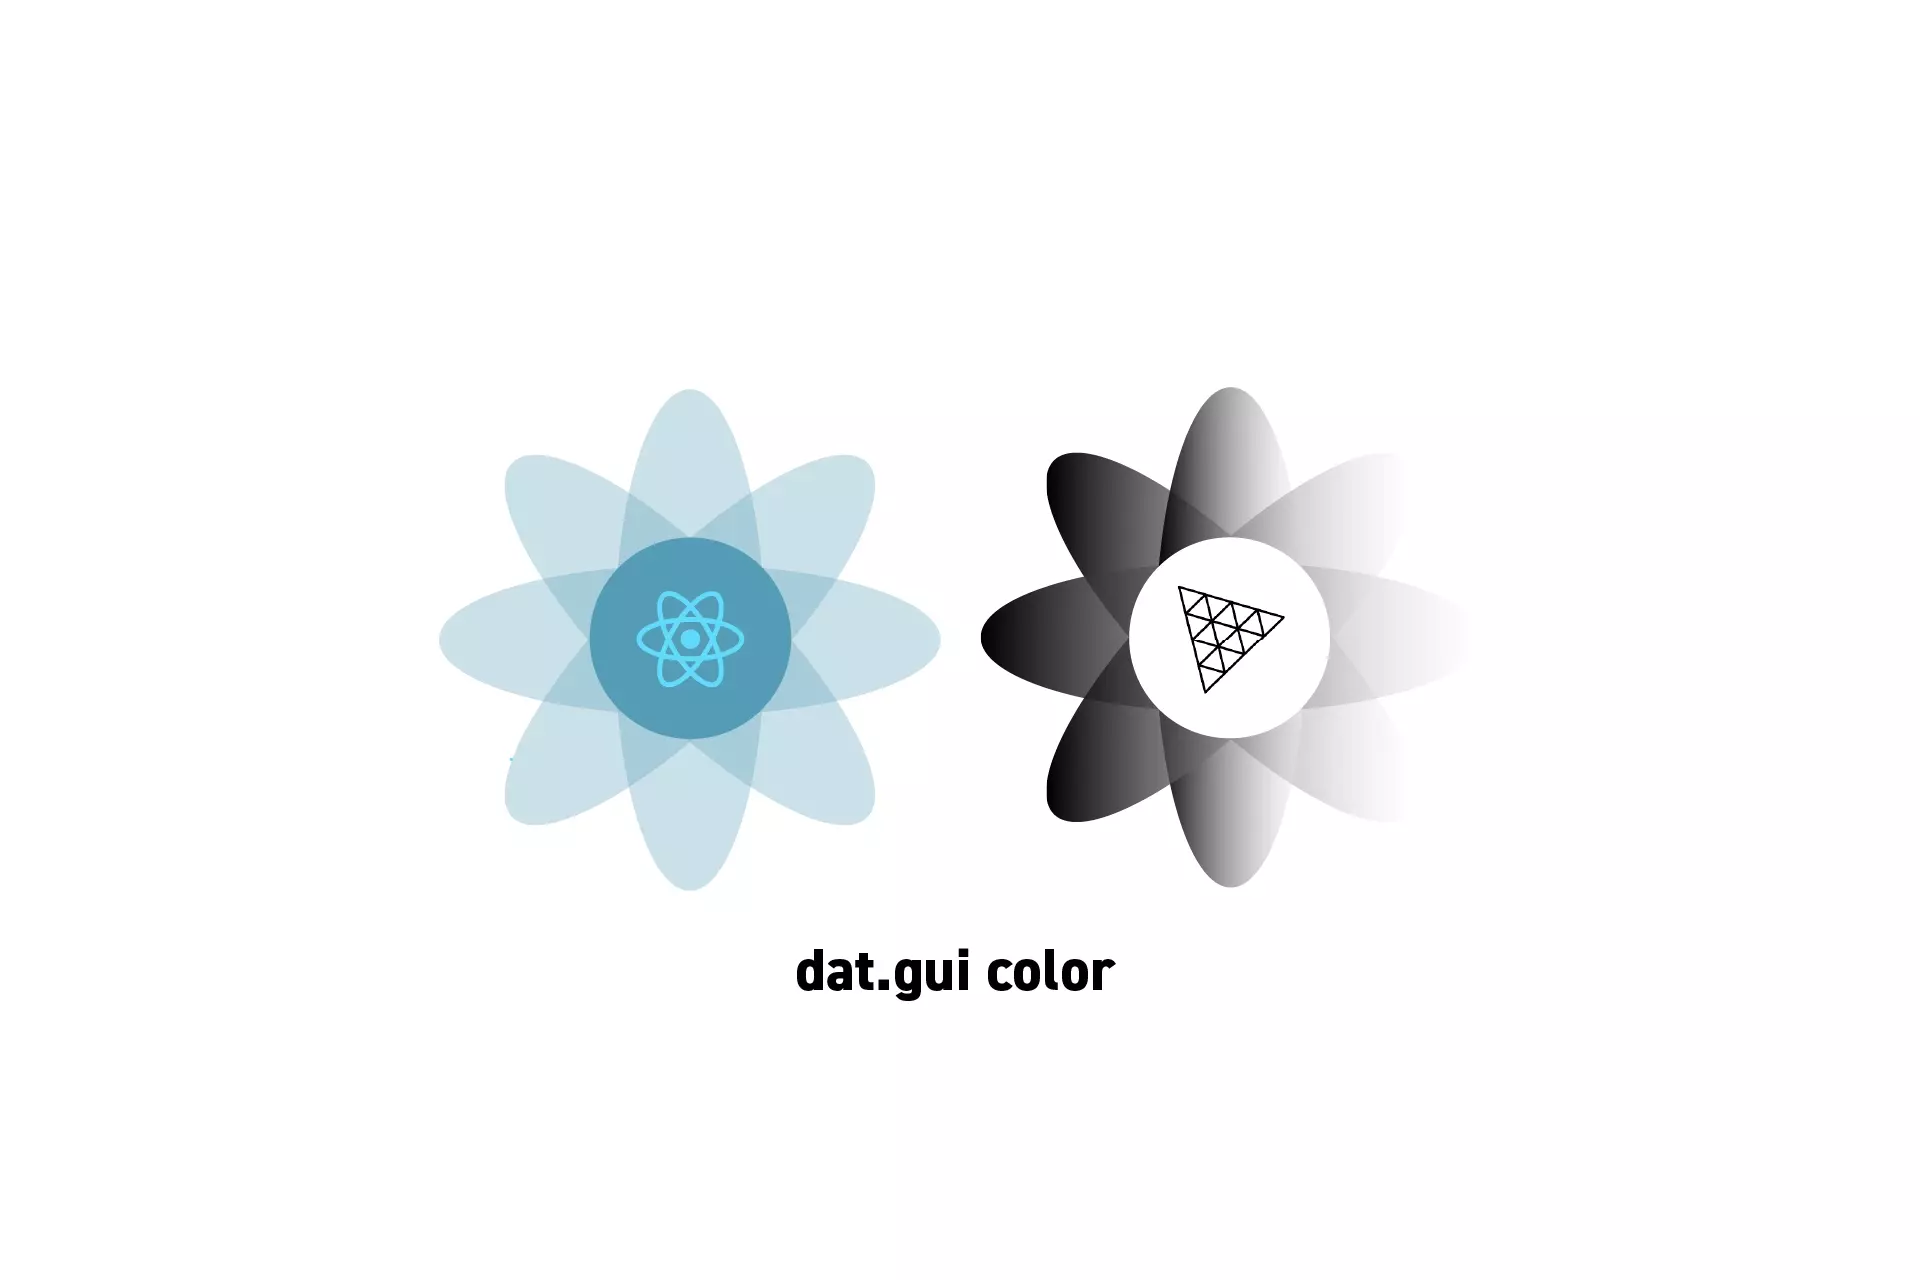 Two flowers that represent ReactJS and ThreeJS side by side. Beneath them sits the text "dat.gui color."